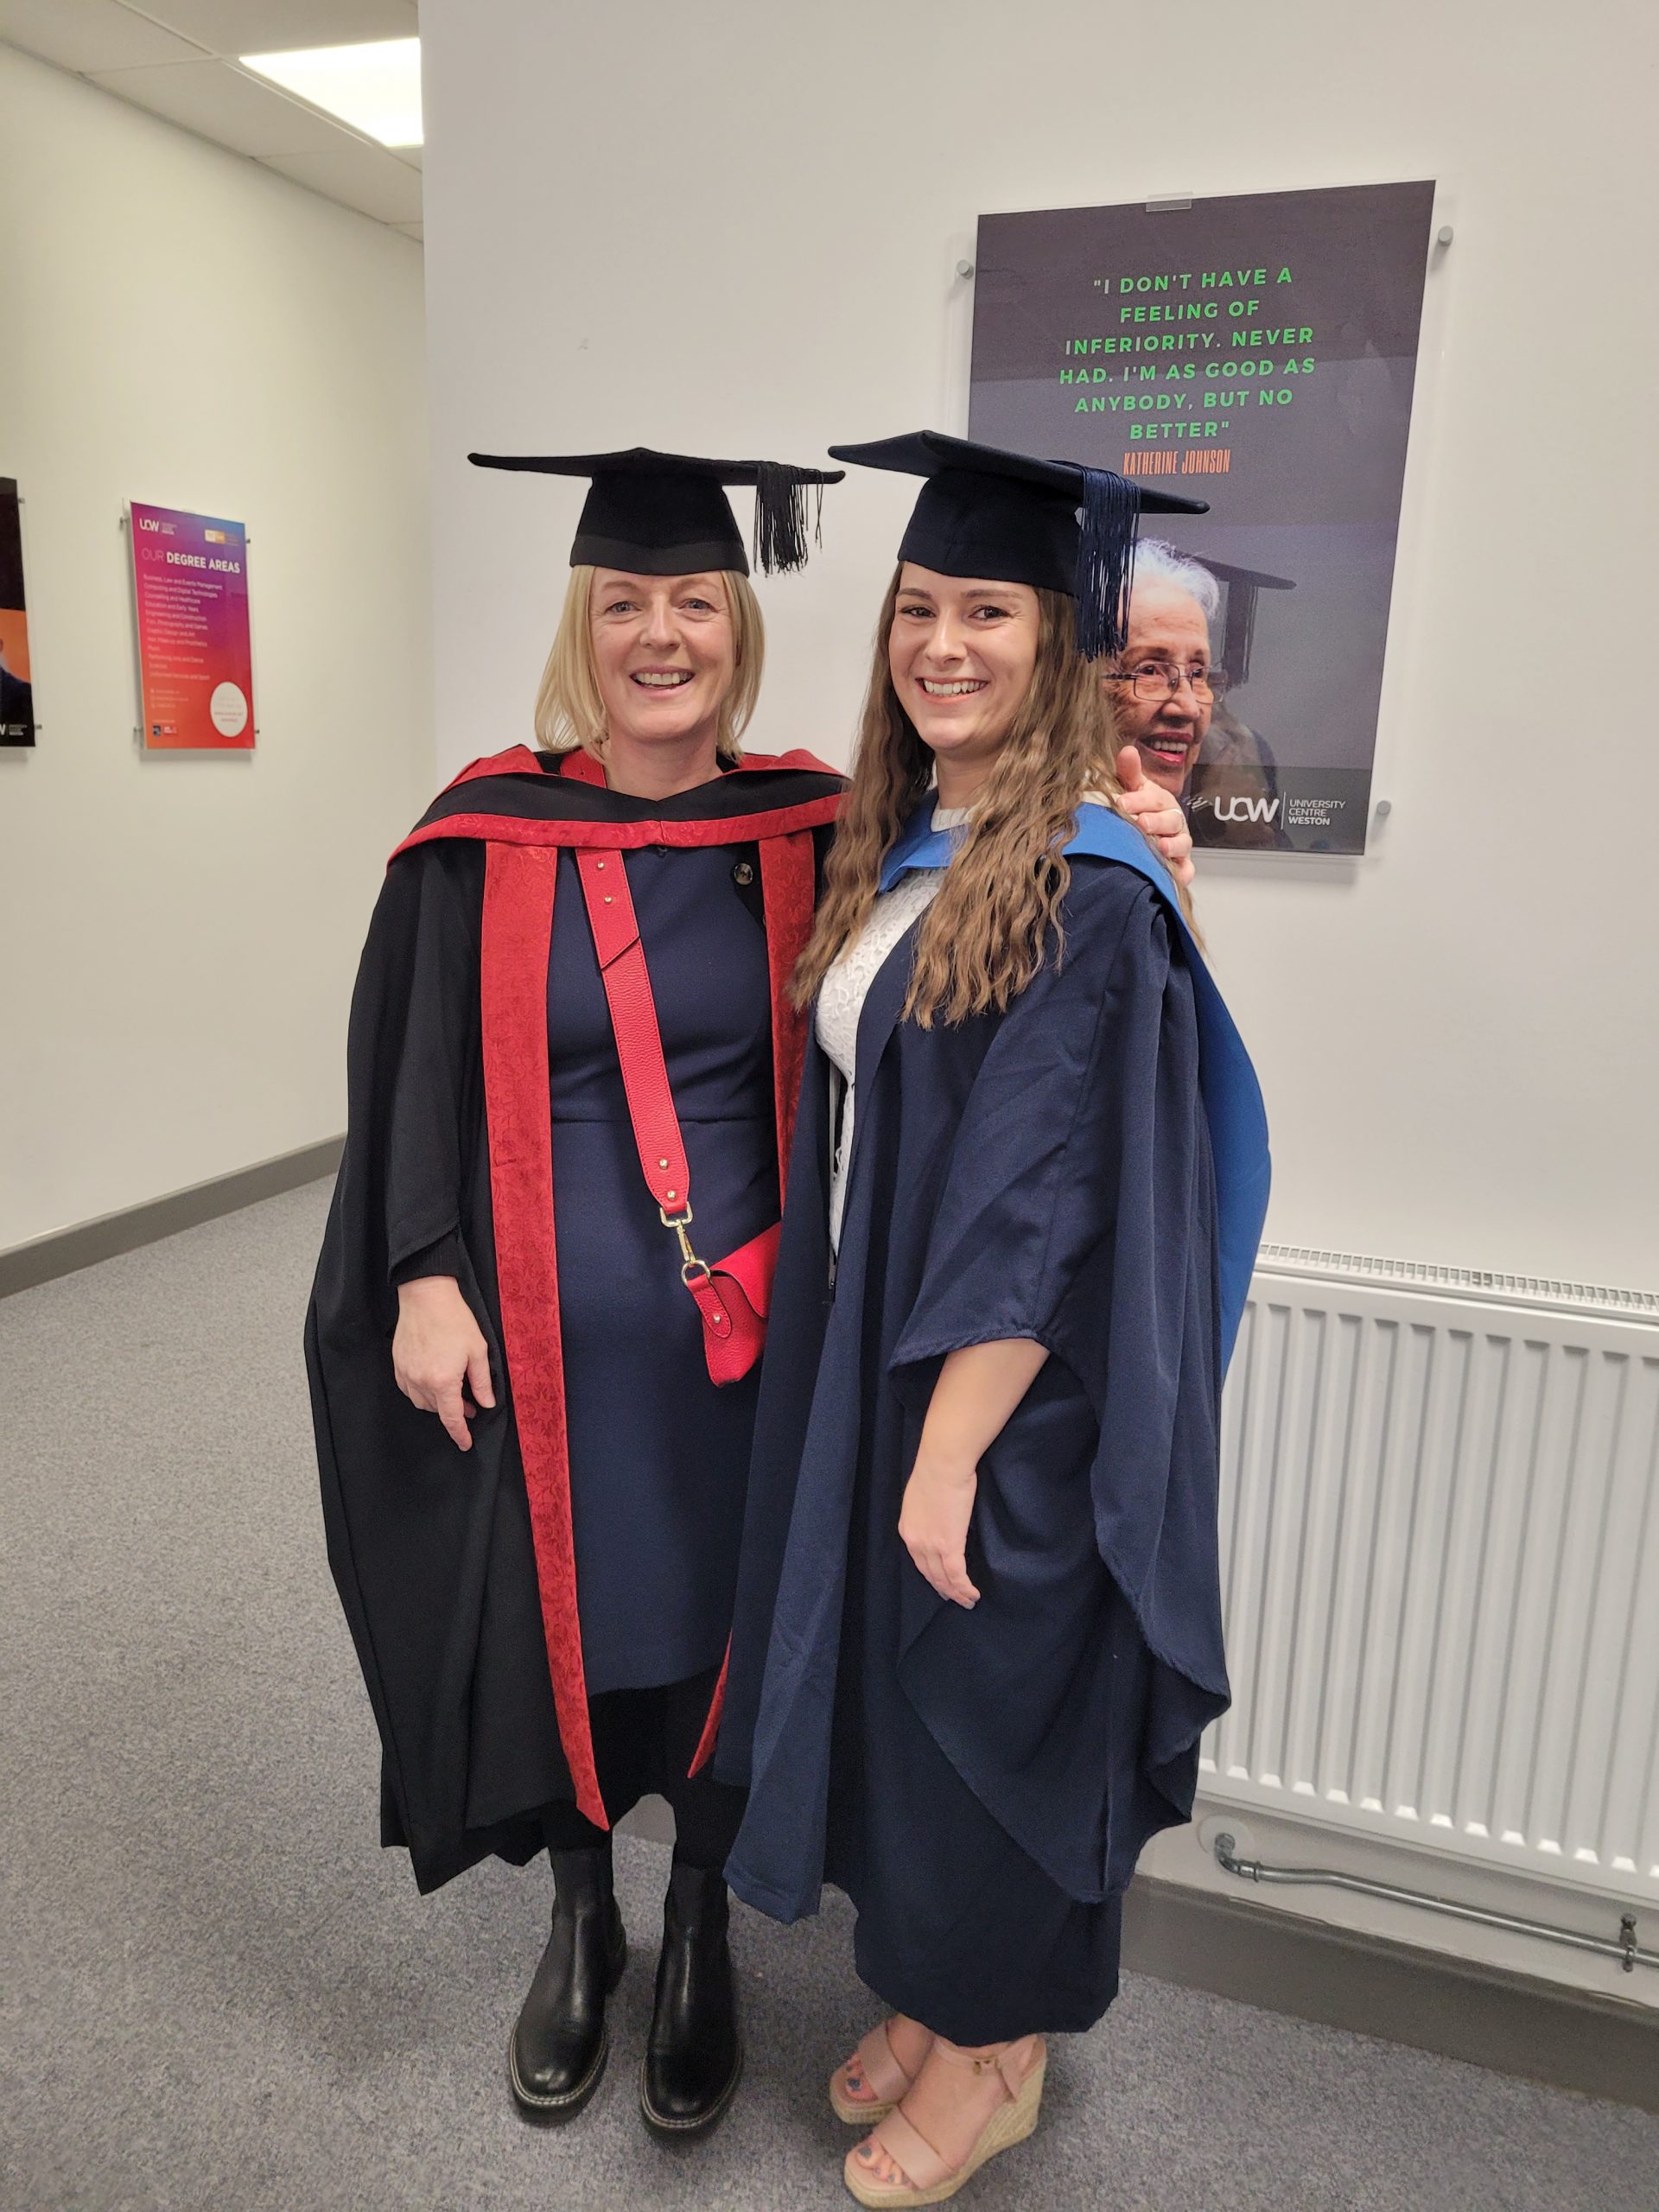 chelsea porter in a graduation gown with her UCW lecturer.